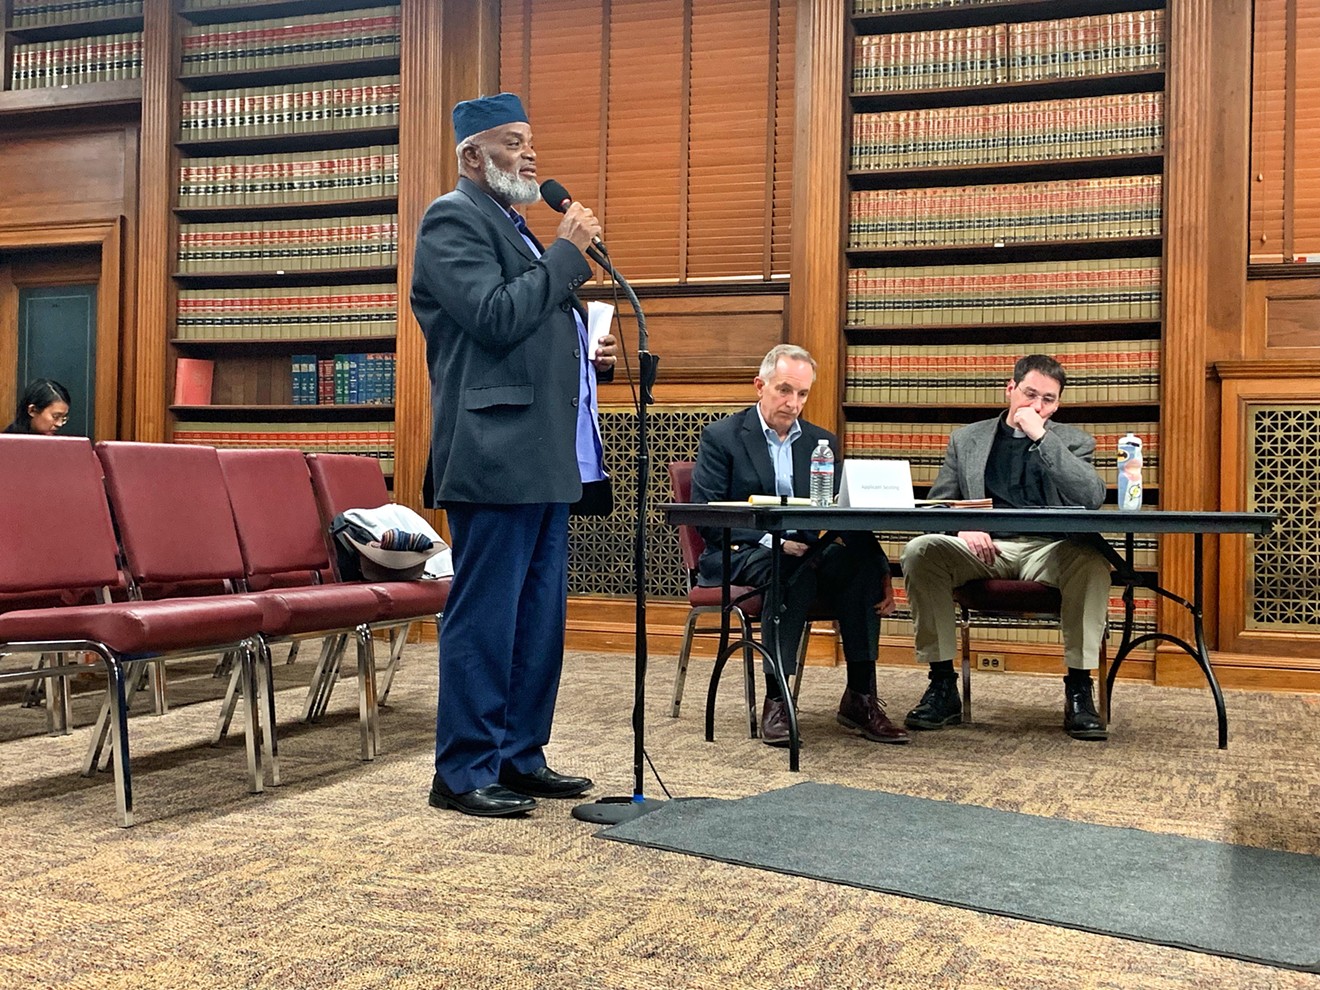 Imam Abdur Rahim Ali voicing his concerns about affordable housing to the Denver Planning Board on December 19.